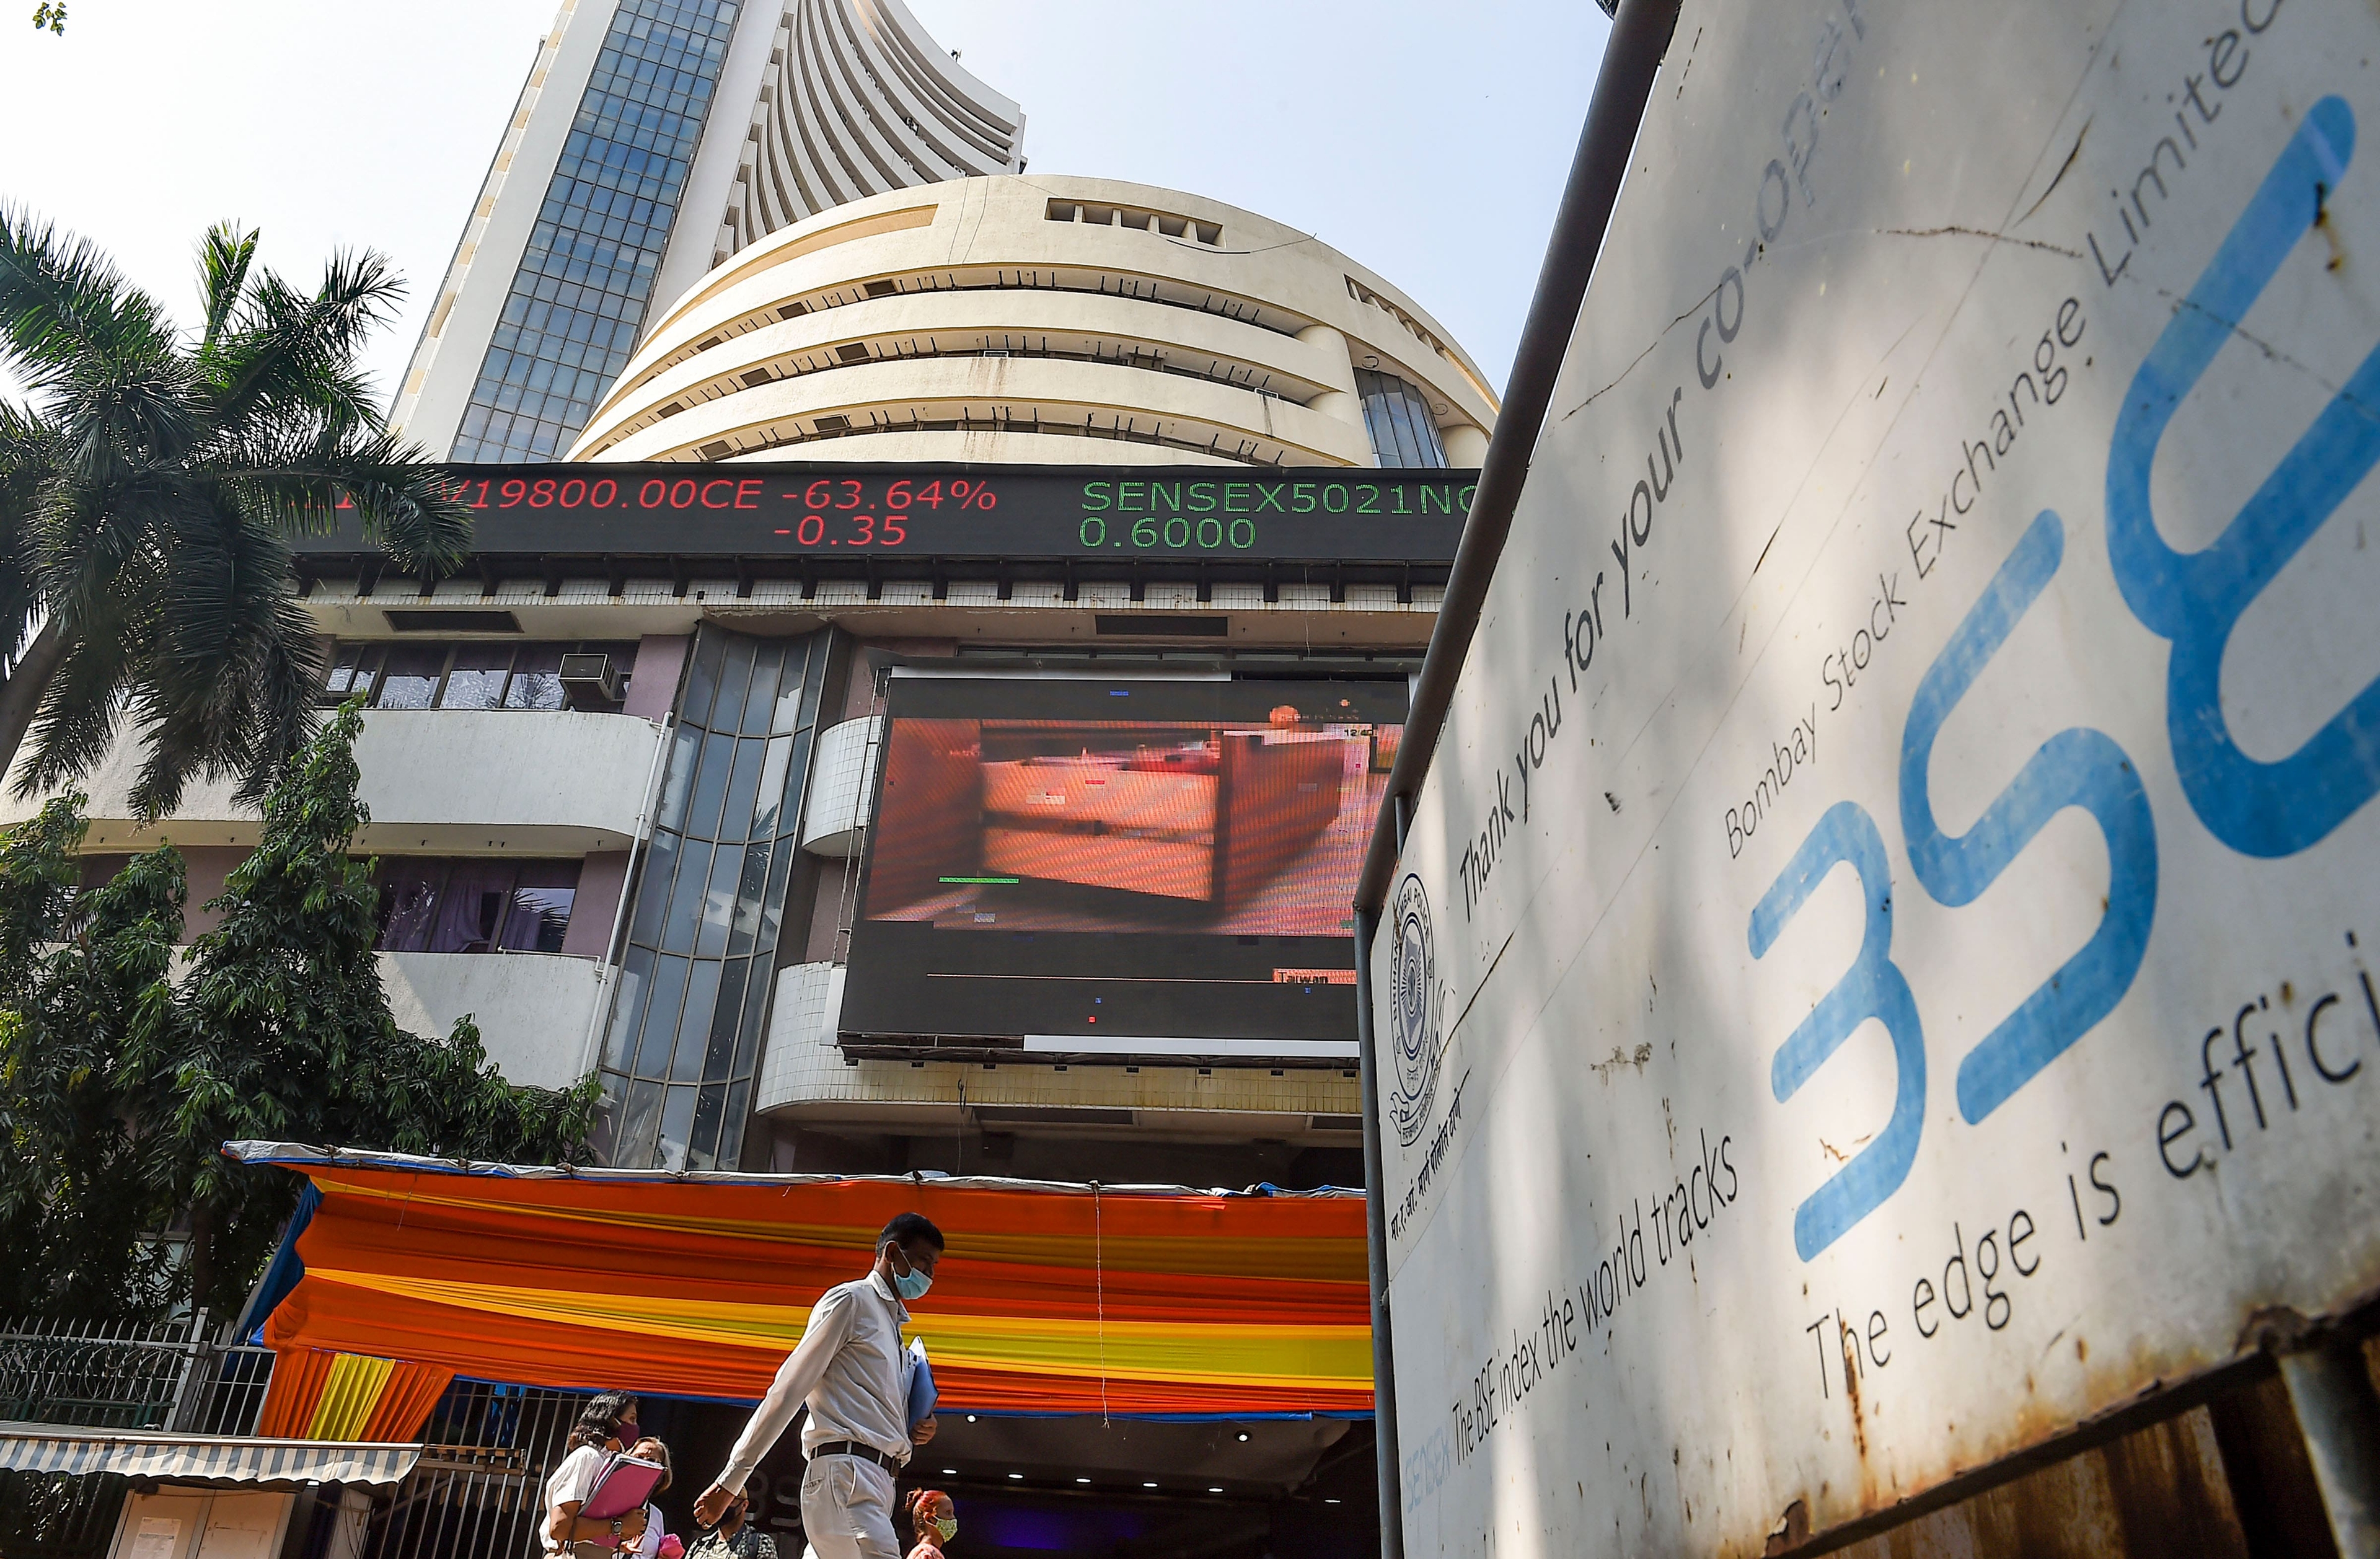 The Indian indices ended in the red on Tuesday following weakness across global peers ahead of US inflation data. Back home, IT, metal and auto sectors dragged the most while banks and financials capped some losses. The Sensex ended 388 points 0.66 percent lower at 58,576 while Nifty lost 144 points or 0.8 percent at 17,530.